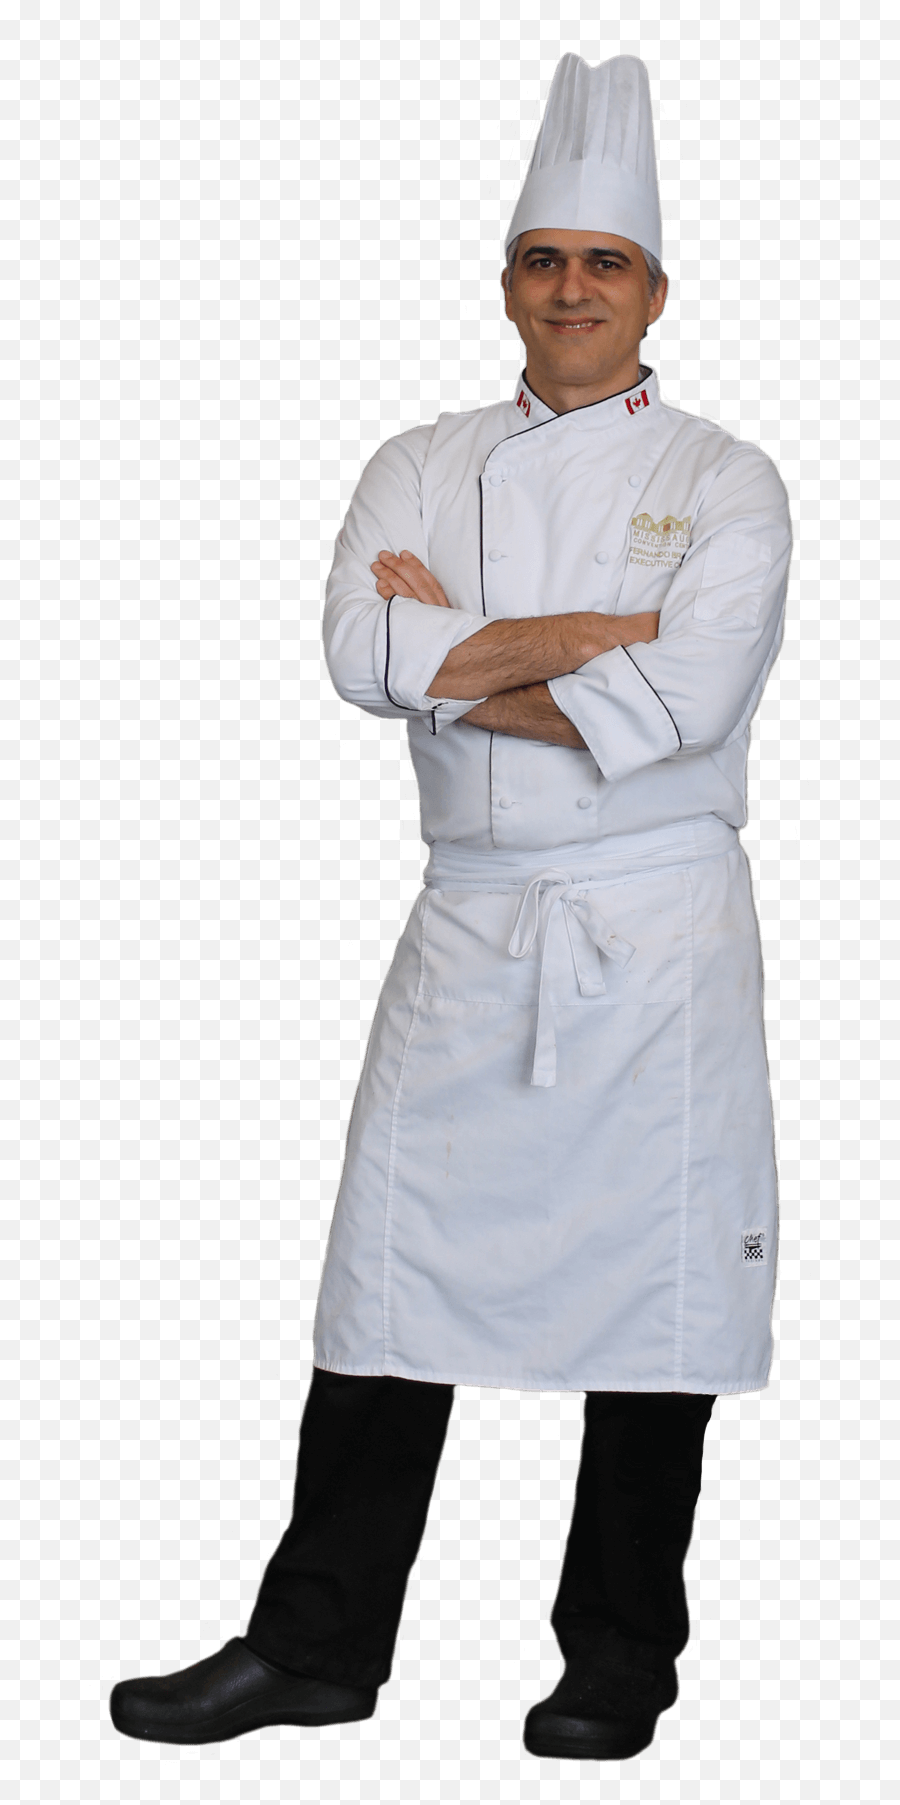 Male Chef Png Image - Transparent Chef Png,Chef Png